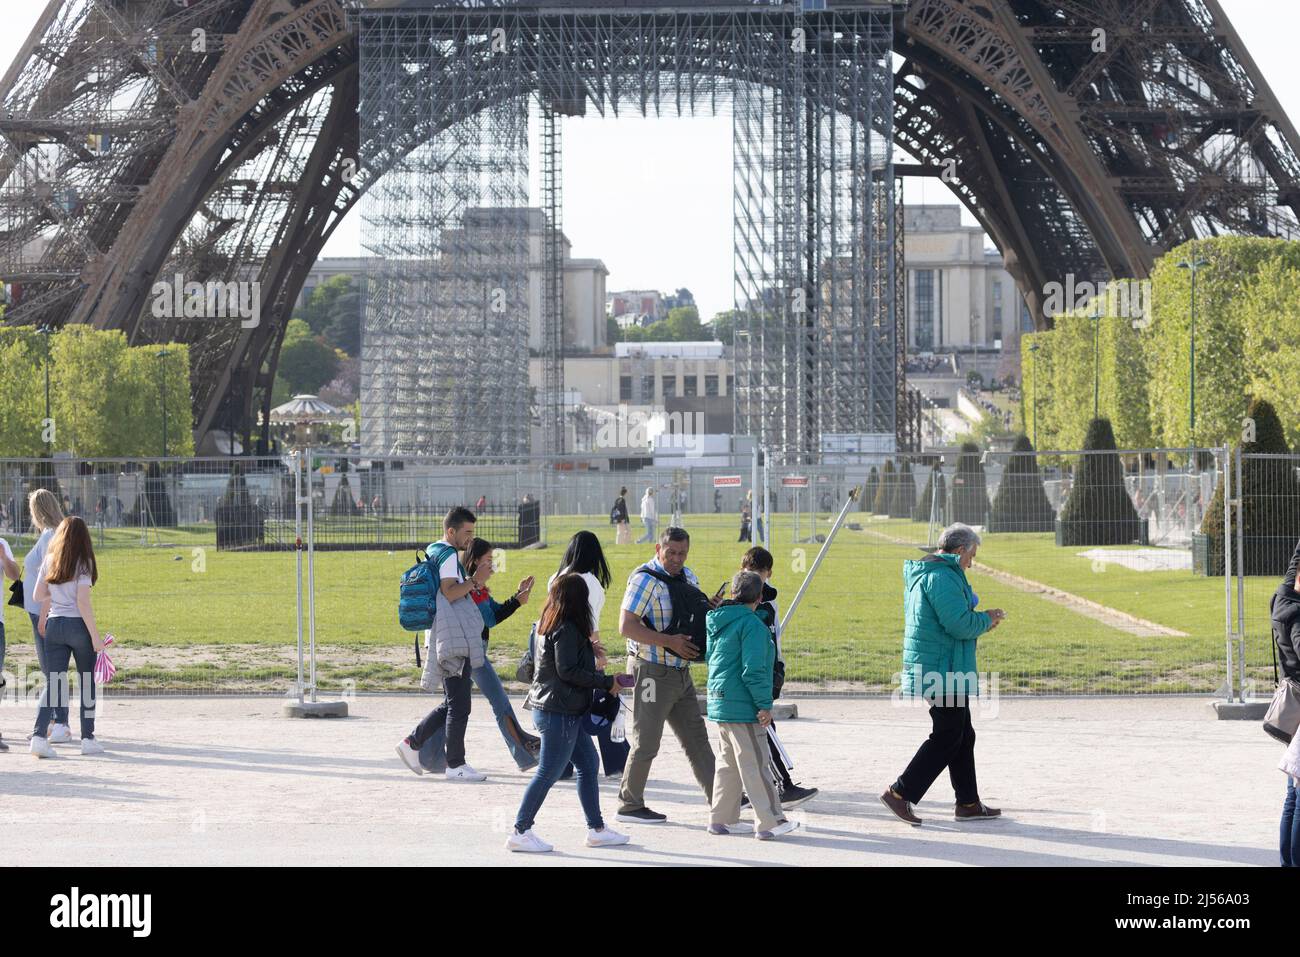 April 20, 2022, Paris, France, France: Paris, France April 20, 2022 - Visitors walk in the tourist area of the Champs De Mars below the Eiffel Tower. The mayor of the 7th arrondissement as well as residents are asking for the Champs De Mars to be closed at night due to the increase in delinquency, linked to the attraction of the Eiffel Tower...TOUR EIFFEL, CHAMPS DE MARS, INSECURITE, DELINQUANCE, TOURISME, SITE TOURISTIQUE, SUJET DE SOCIETE, IMMIGRATION, VENDEURS A LA SAUVETTE, SECURITE, MIGRANTS, MONUMENT, (Credit Image: © Vincent Isore/IP3 via ZUMA Press) Stock Photo